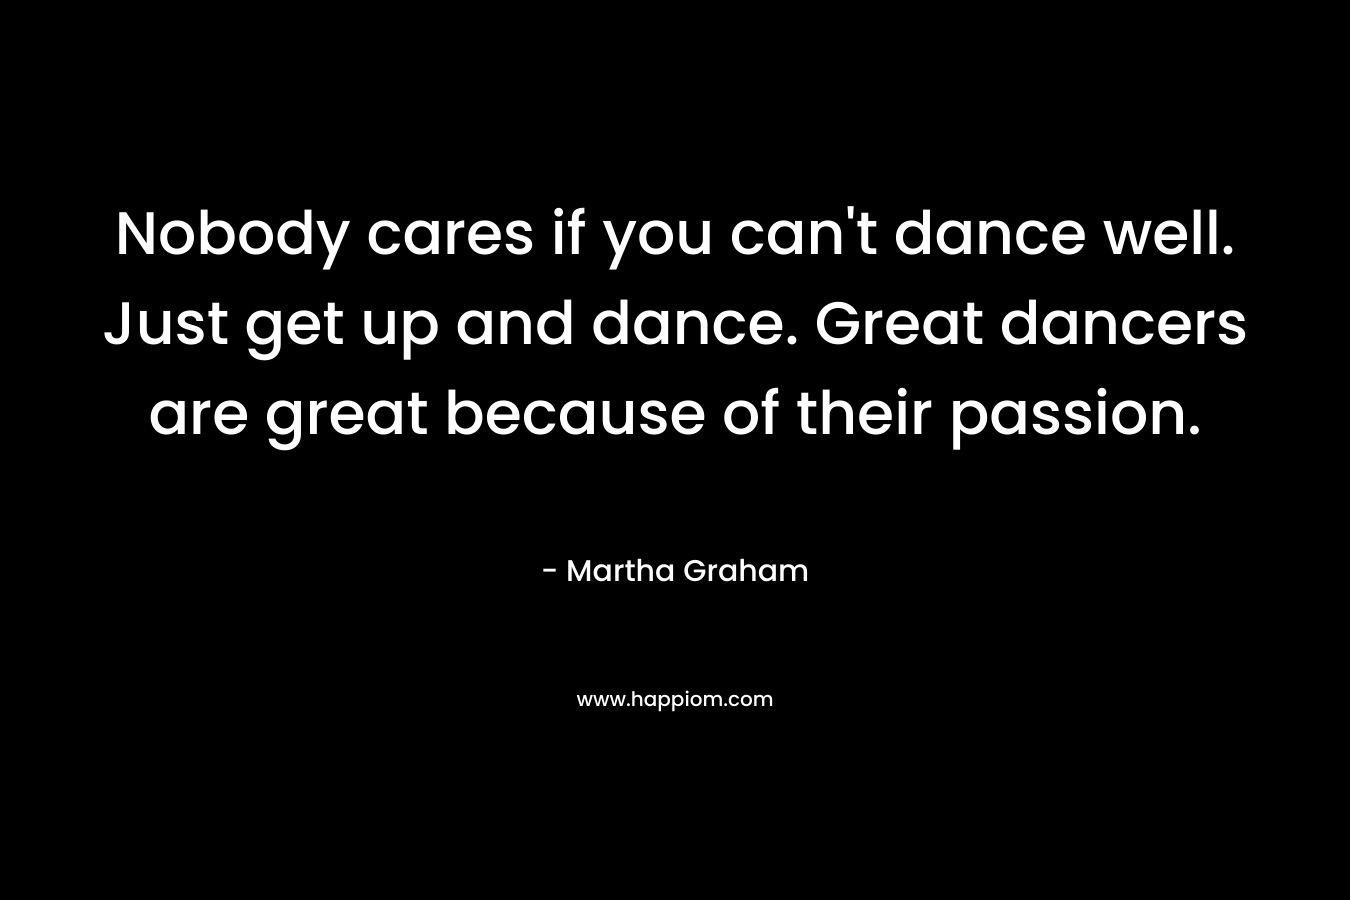 Nobody cares if you can't dance well. Just get up and dance. Great dancers are great because of their passion.